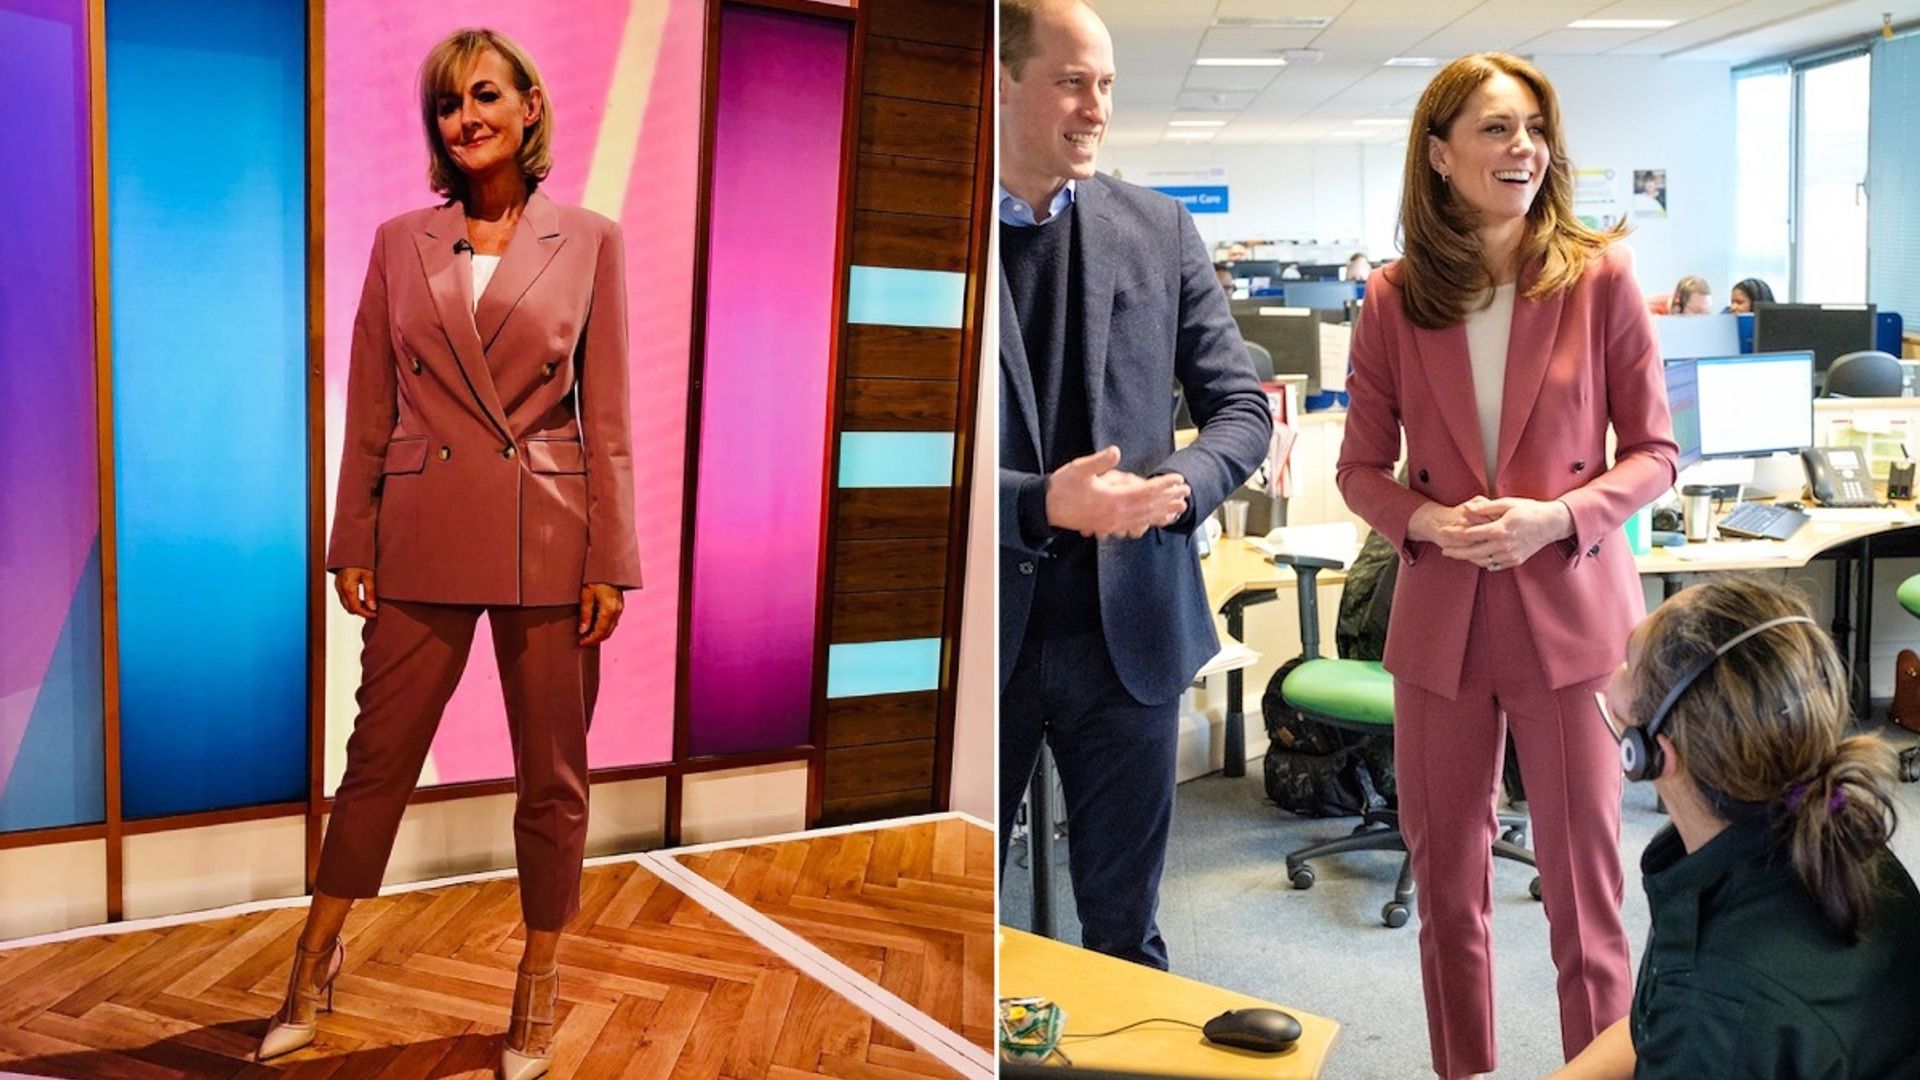 Jane Moore just recreated Kate Middleton's power pose in a pink suit - and it's a Topshop sale bargain